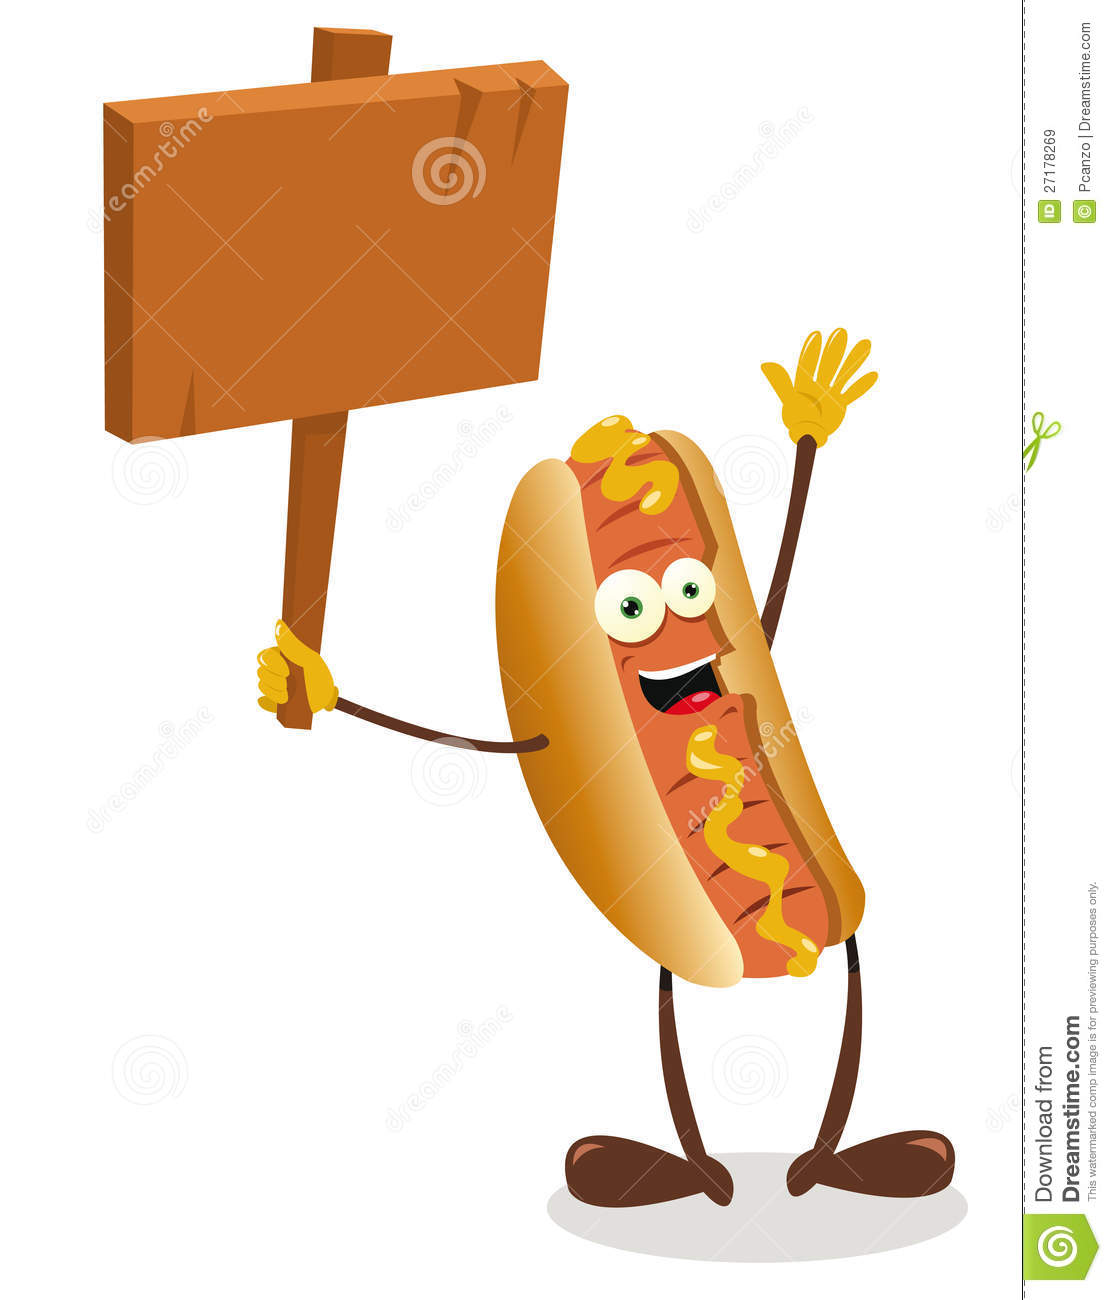 Funny Hot Dog Holding A Wooden Sign Royalty Free Stock Images   Image